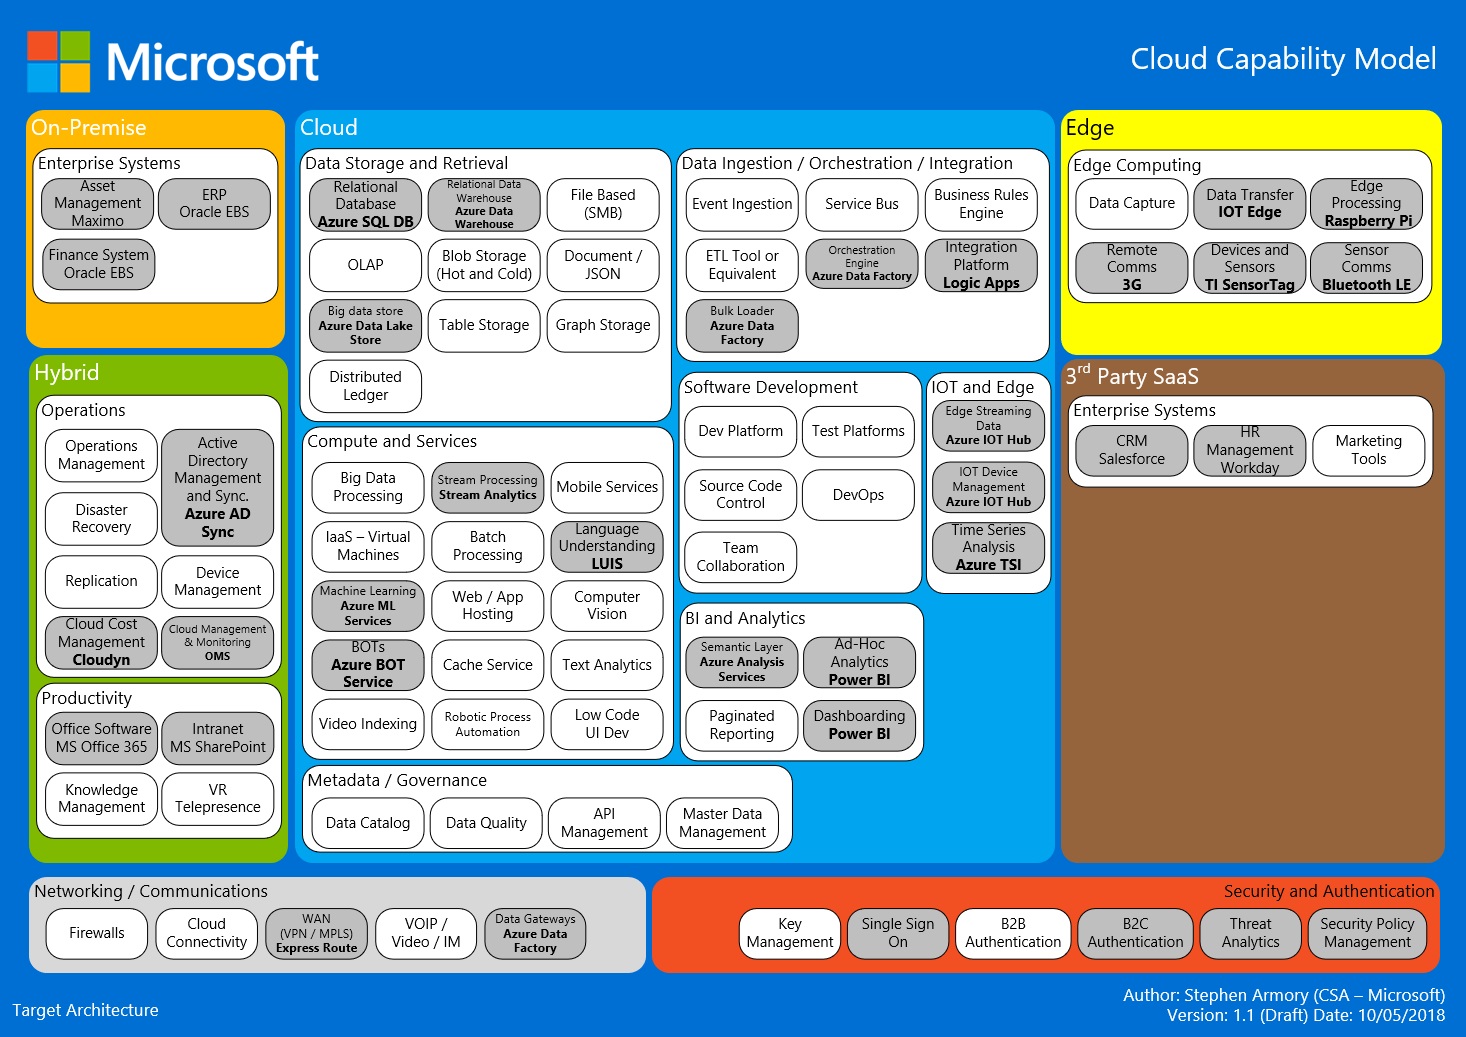 An example of an up to date Cloud Capability Model